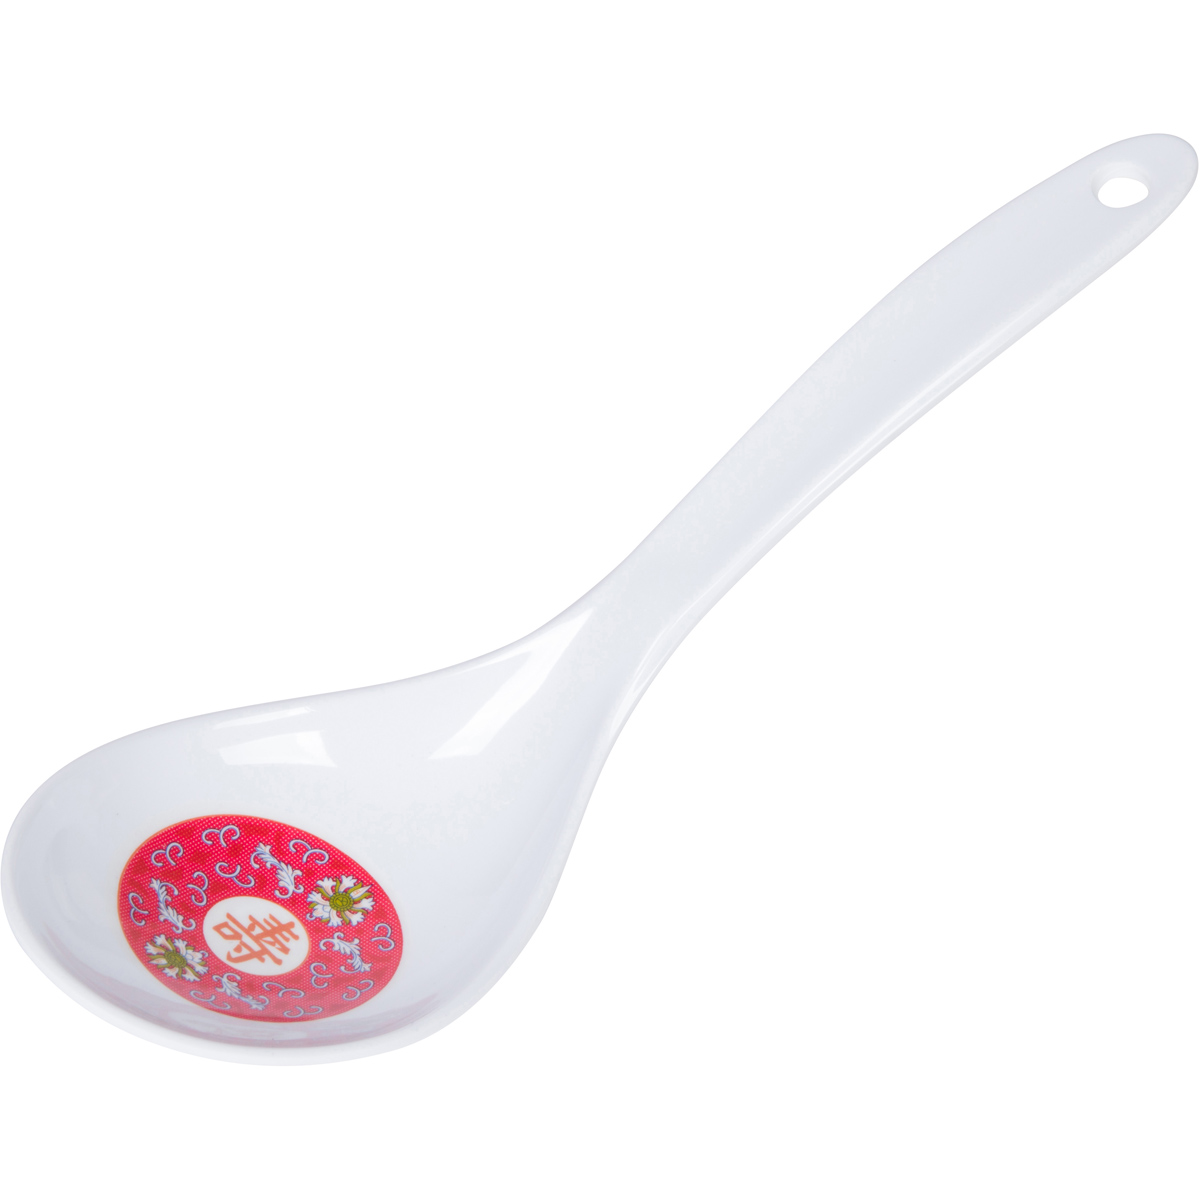 CHINESE MELAMINE SERVING SPOON 